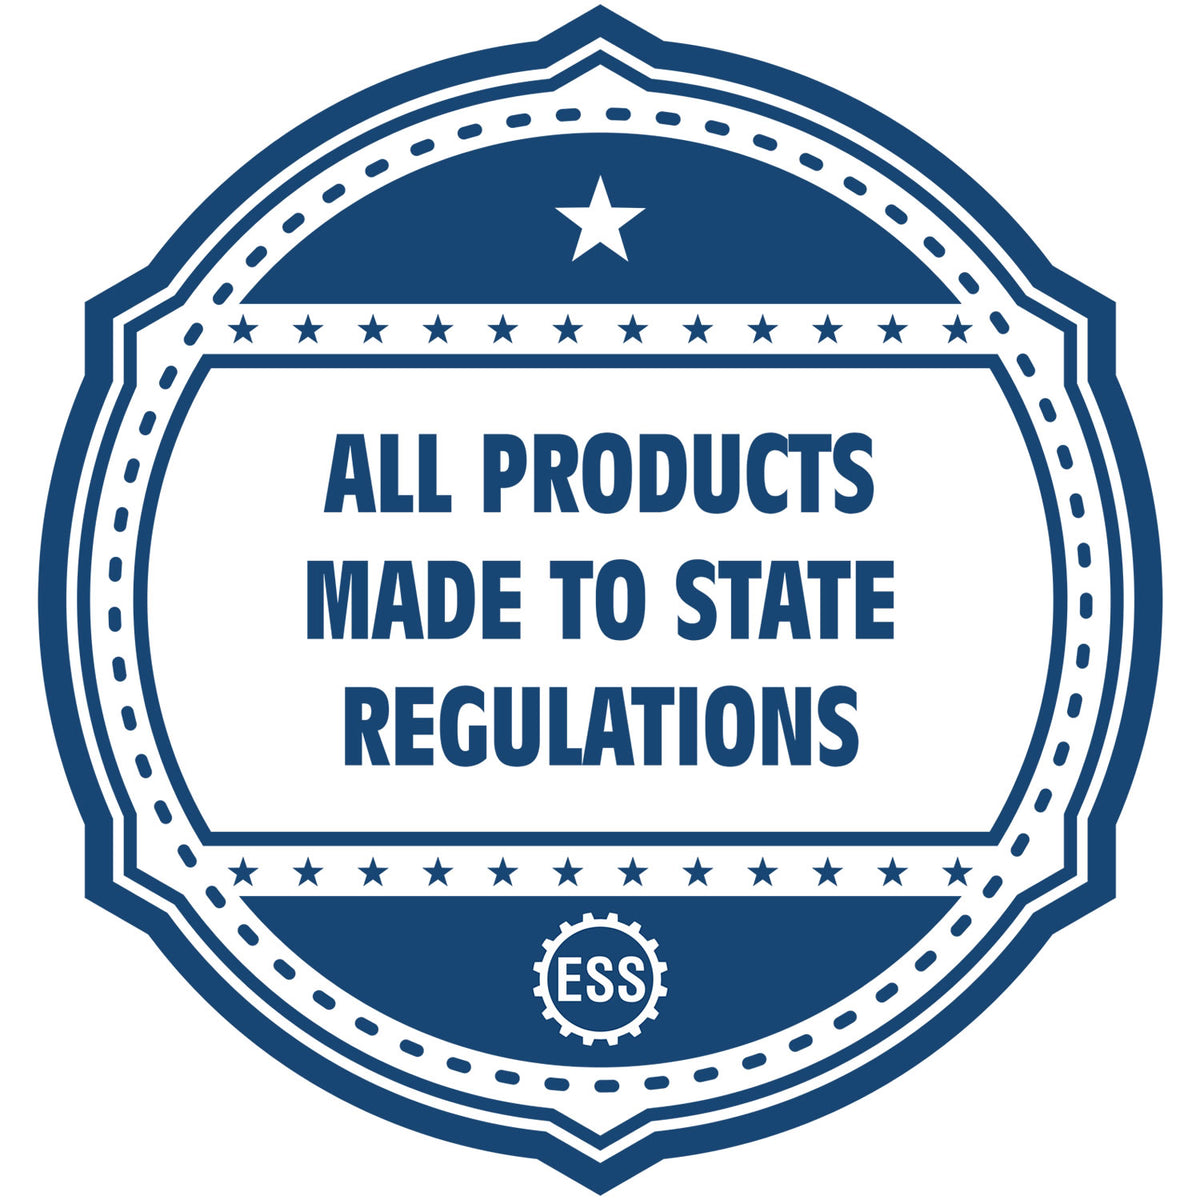 An icon or badge element for the Long Reach Texas PE Seal showing that this product is made in compliance with state regulations.